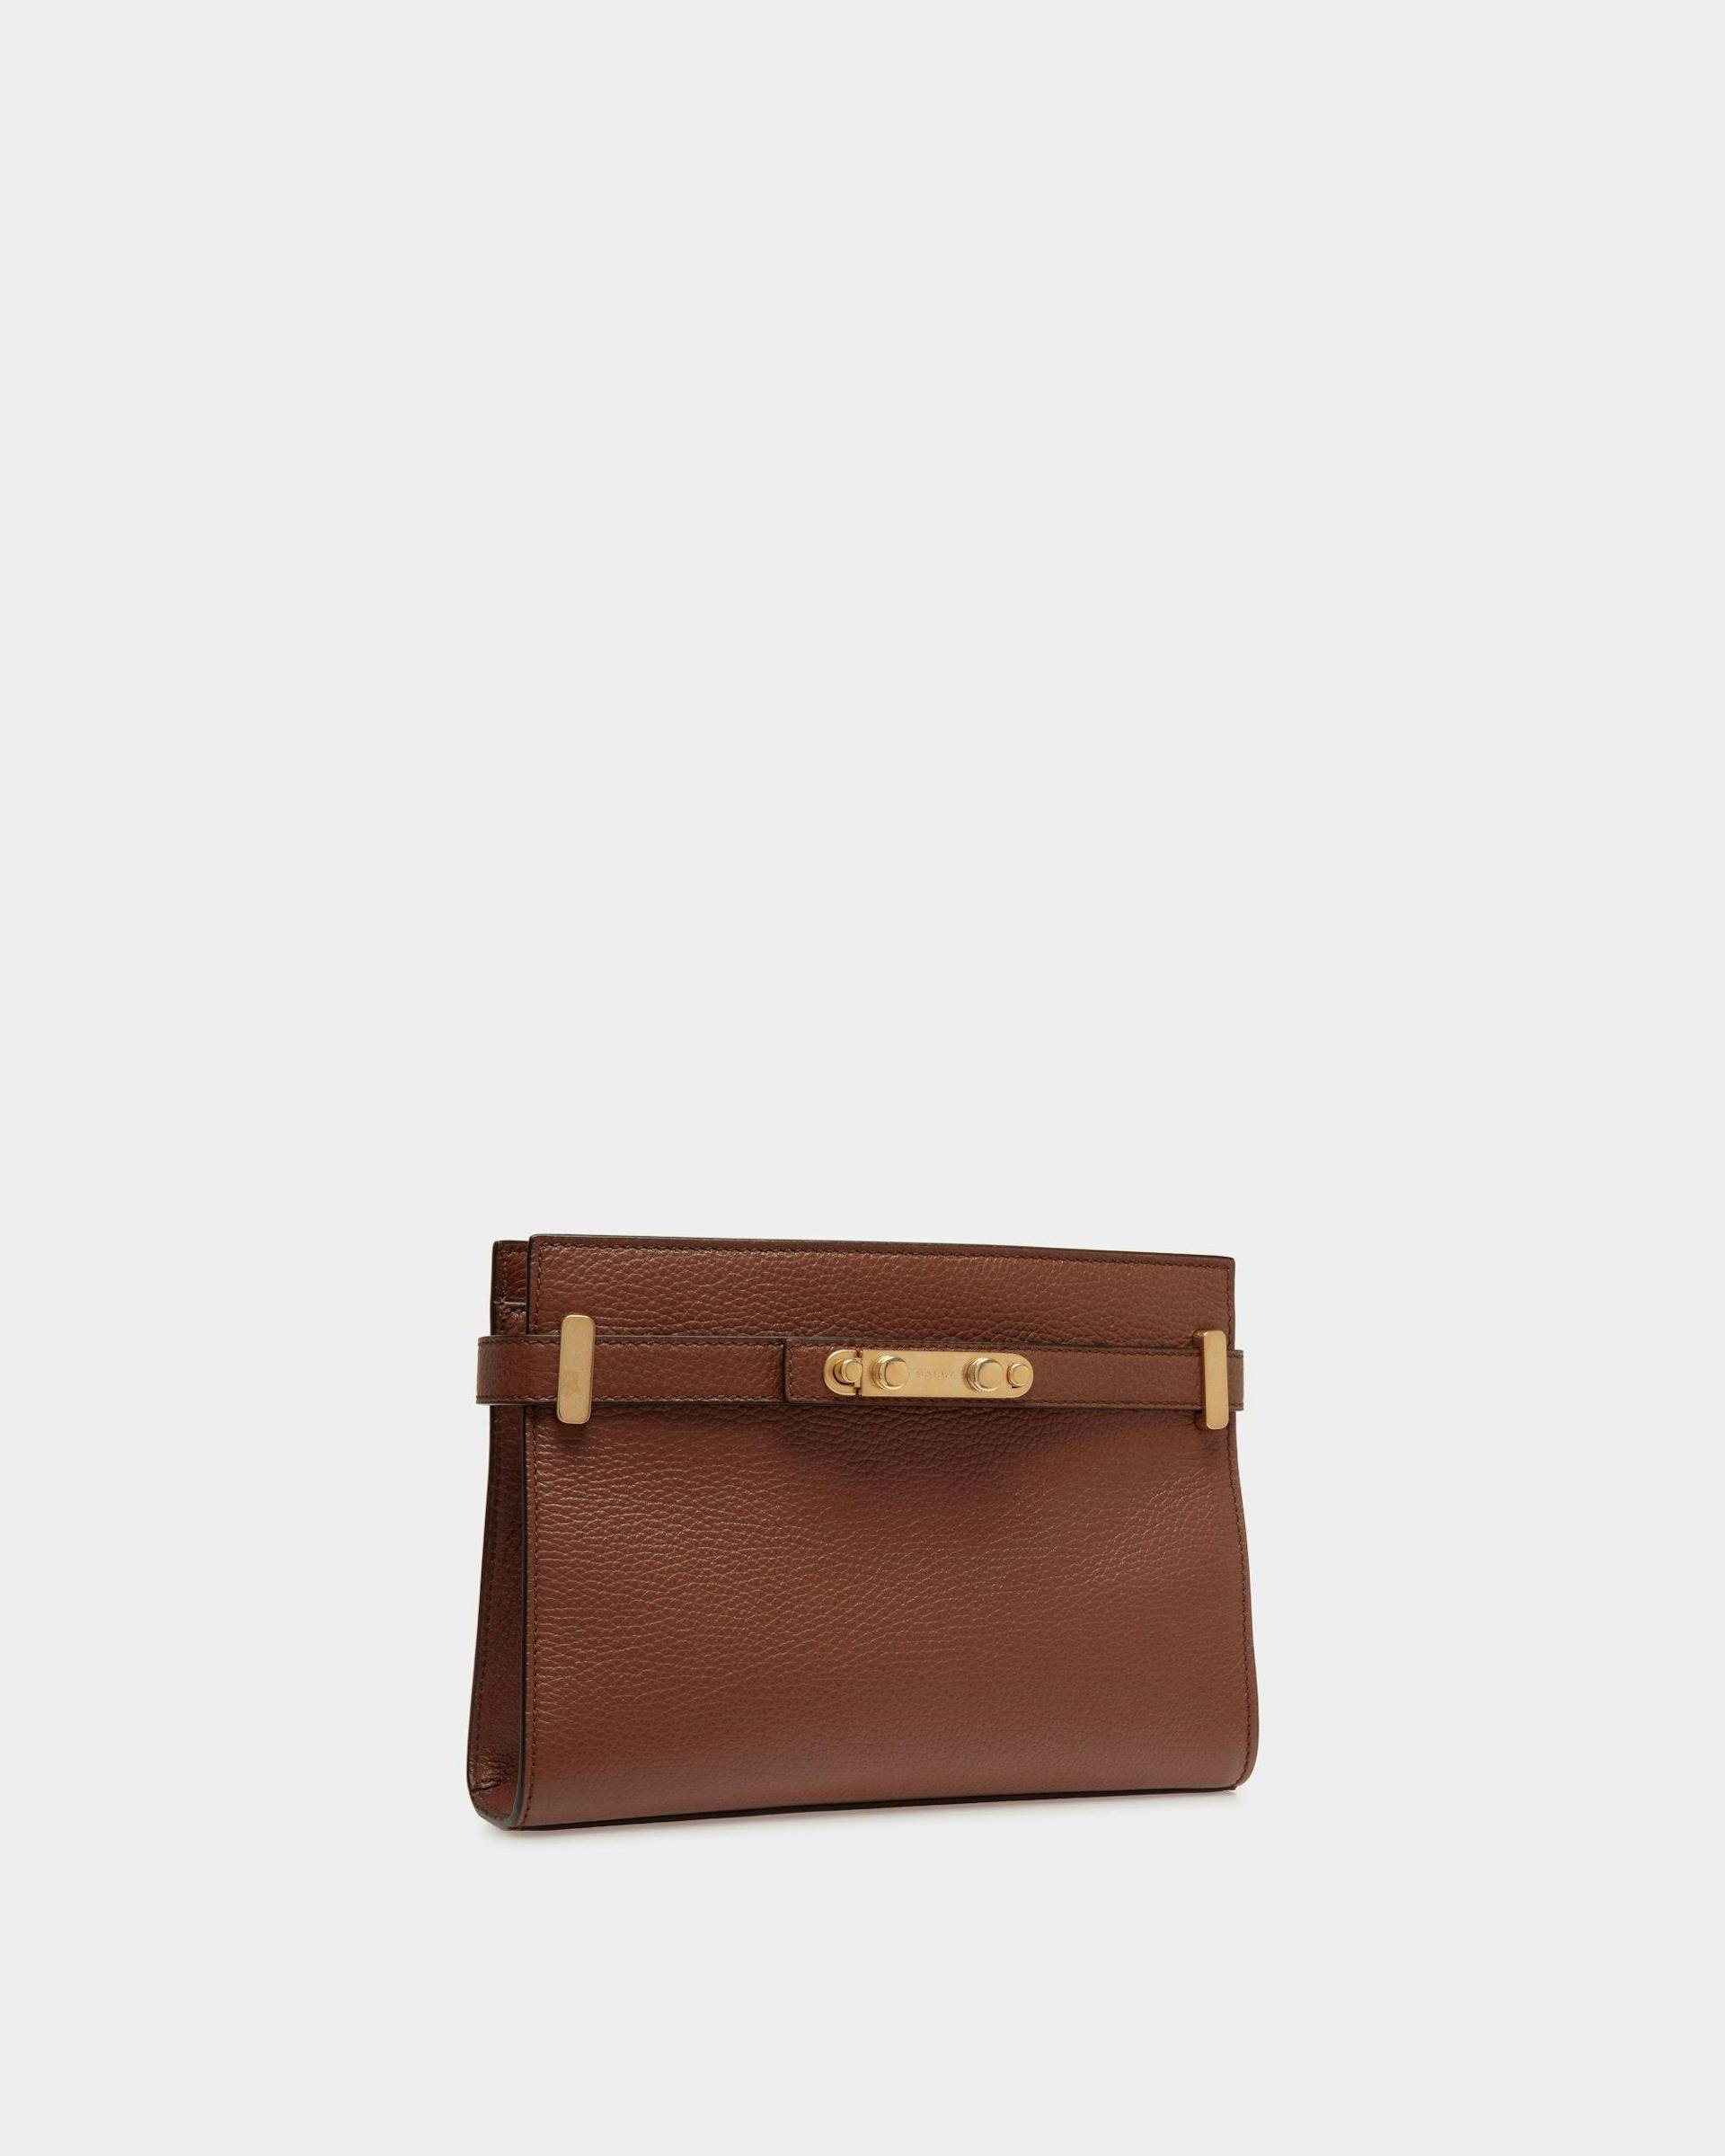 Women's Carriage Crossbody Bag in Brown Grained Leather | Bally | Still Life 3/4 Front